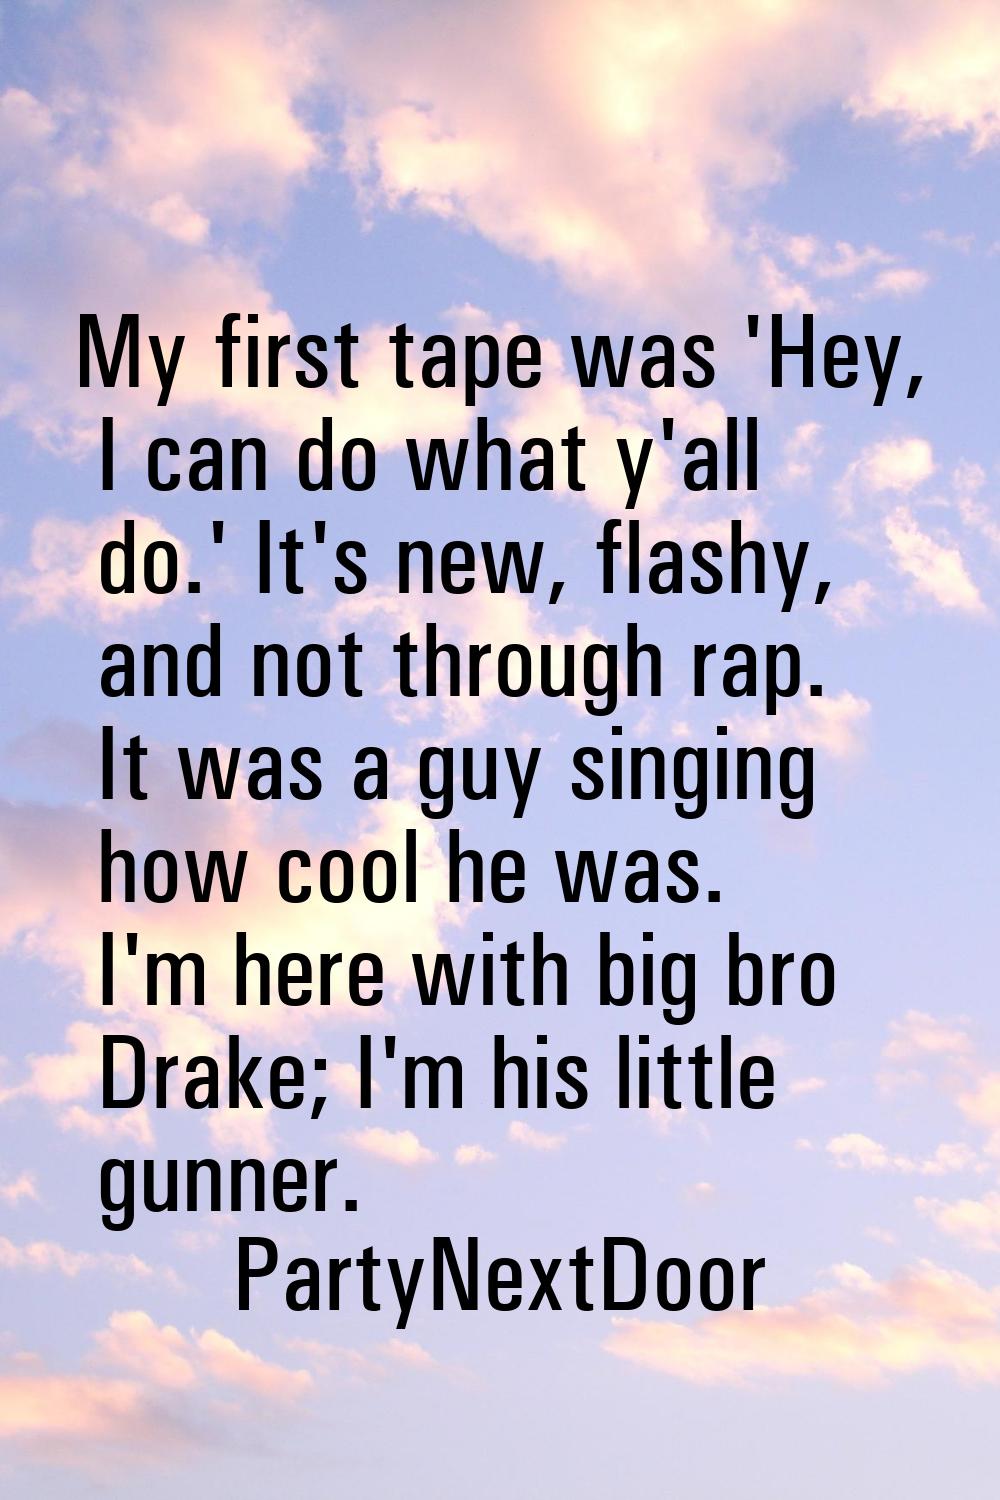 My first tape was 'Hey, I can do what y'all do.' It's new, flashy, and not through rap. It was a gu